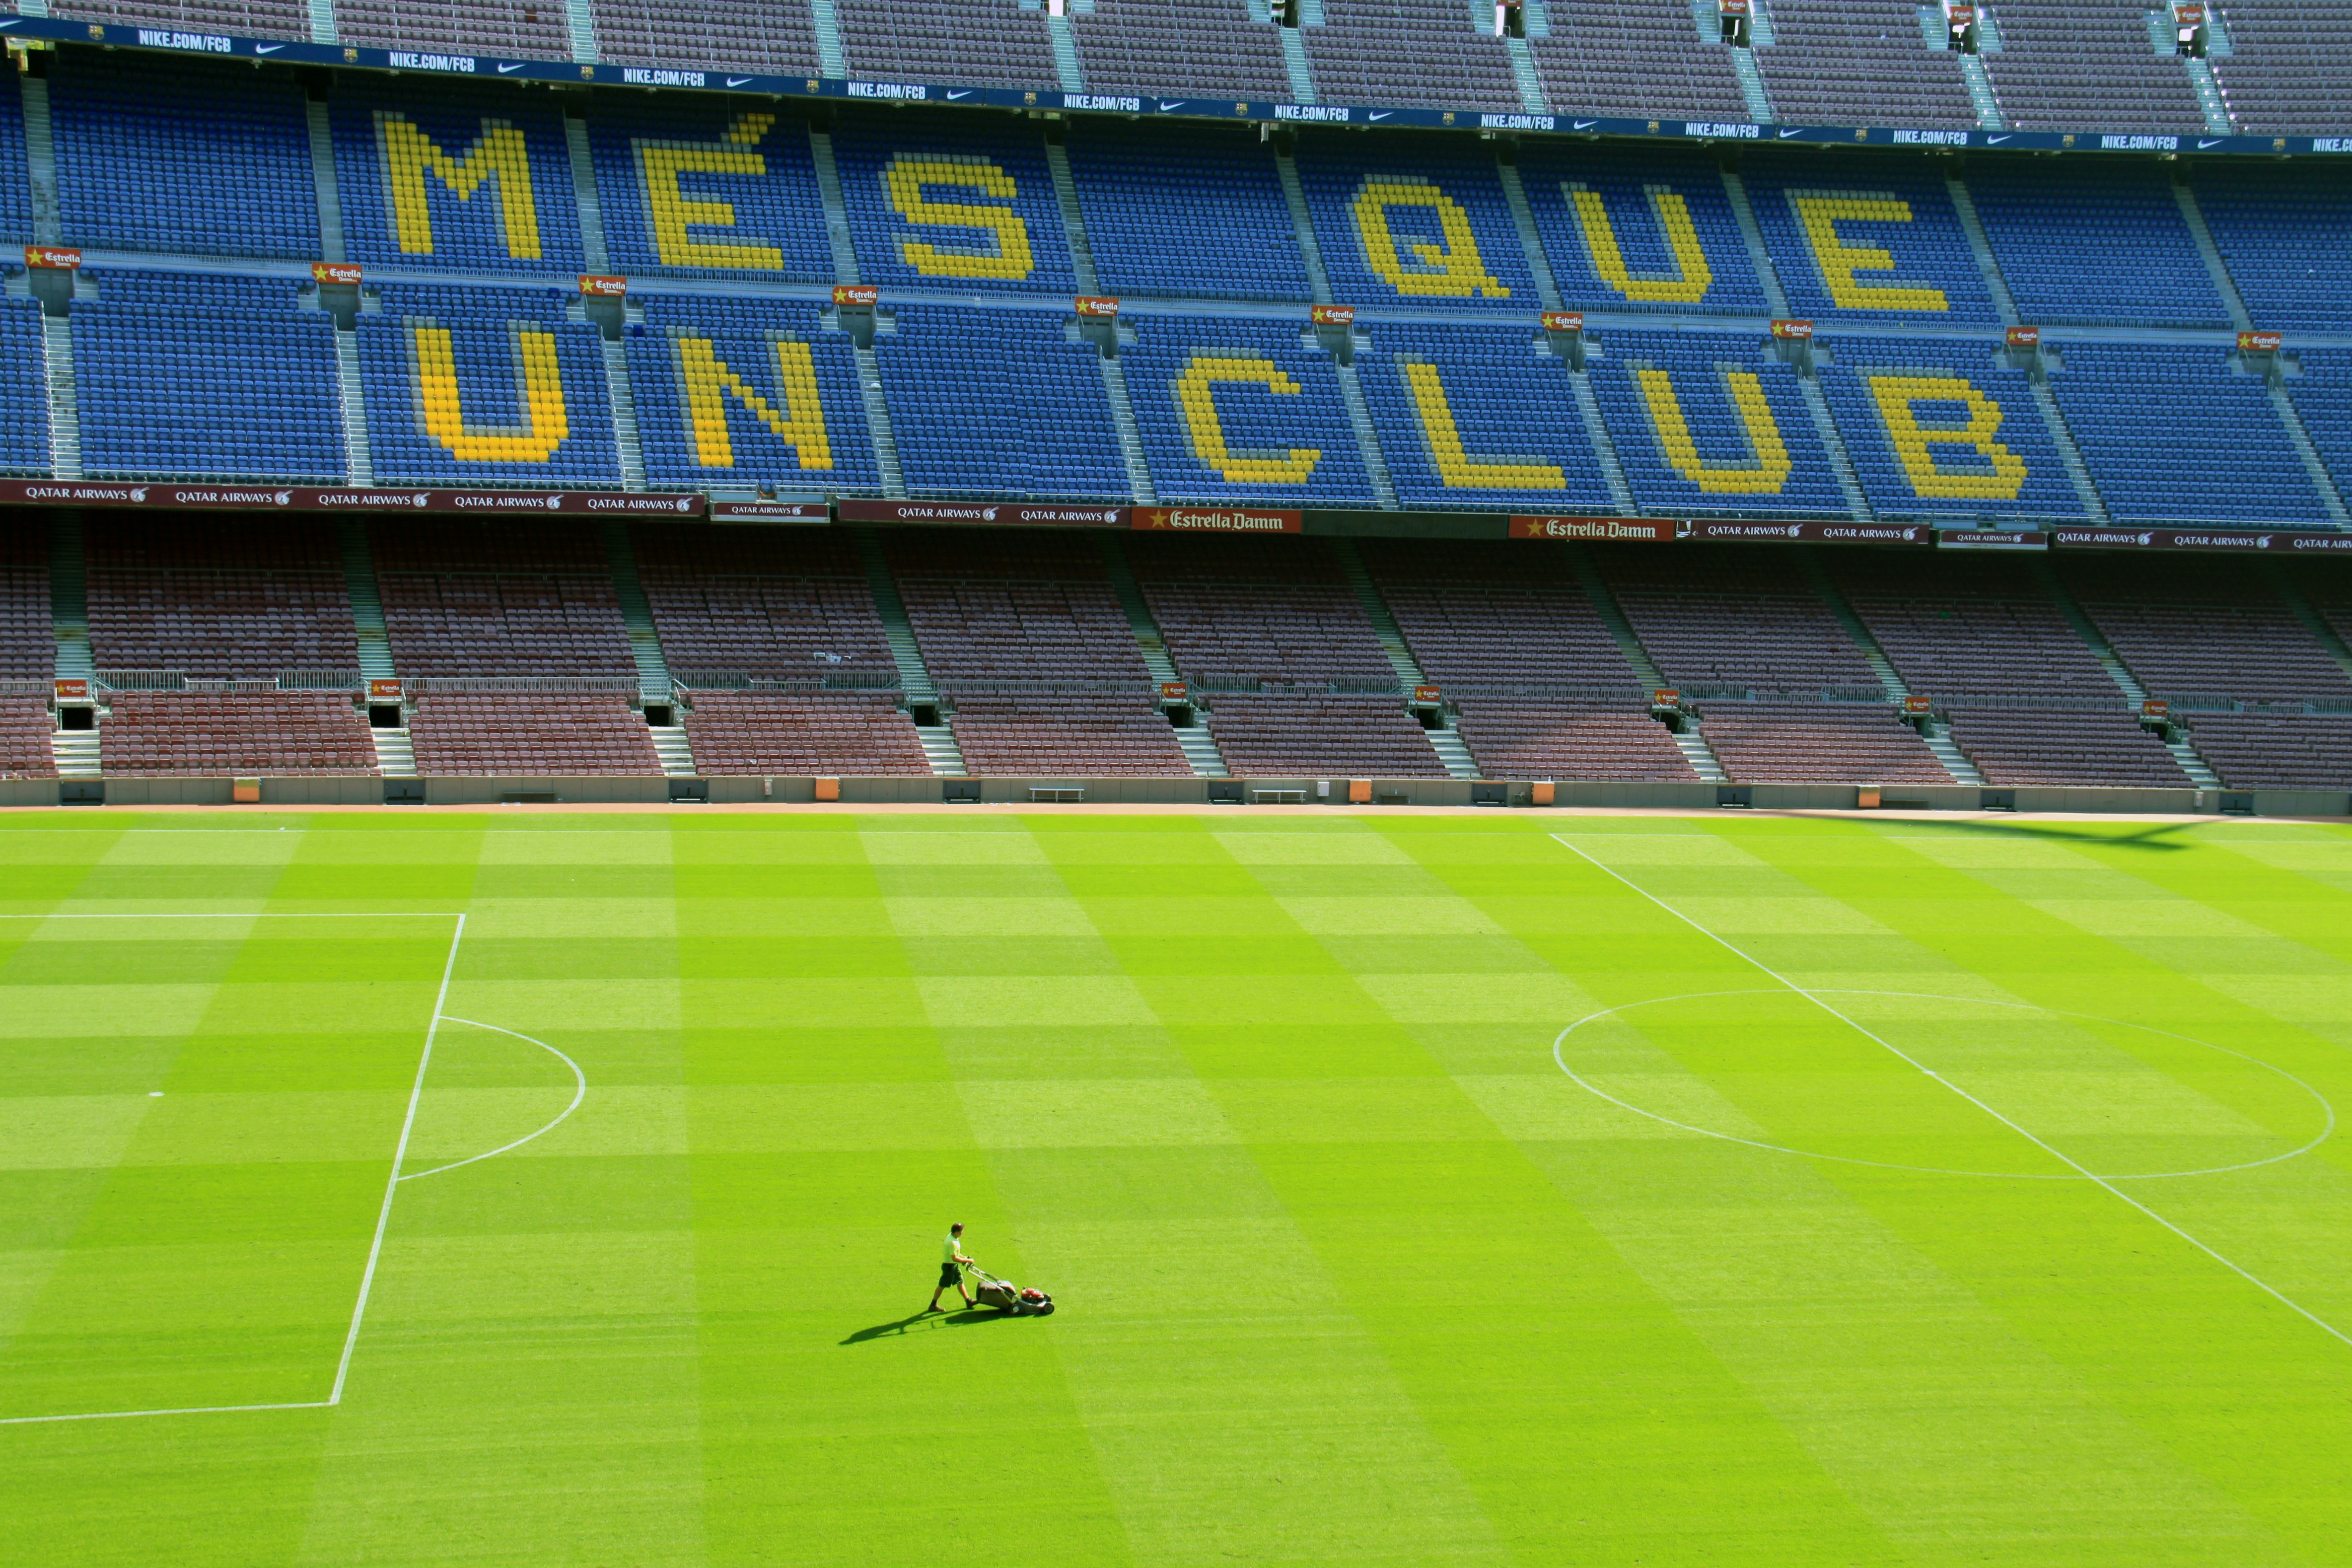 Whilst on vacation in Barcelona, I visited the world-famous Nou Camp stadium, the home of Barcelona. The tour of the stadium and the history of the club is amazing. As part of the tour, you end up on at the top of the first tier of seats and have a wonderful view of the pitch. At this point that I noticed the lone gardener, with his lawn mower, walking up and down the pitch. I thought, WOW, what an incredibly long and tedious job to have to do. However, it is a job that needs to be done exceptionally well, to ensure the pitch is perfect for the stars of Barcelona to play football on it.